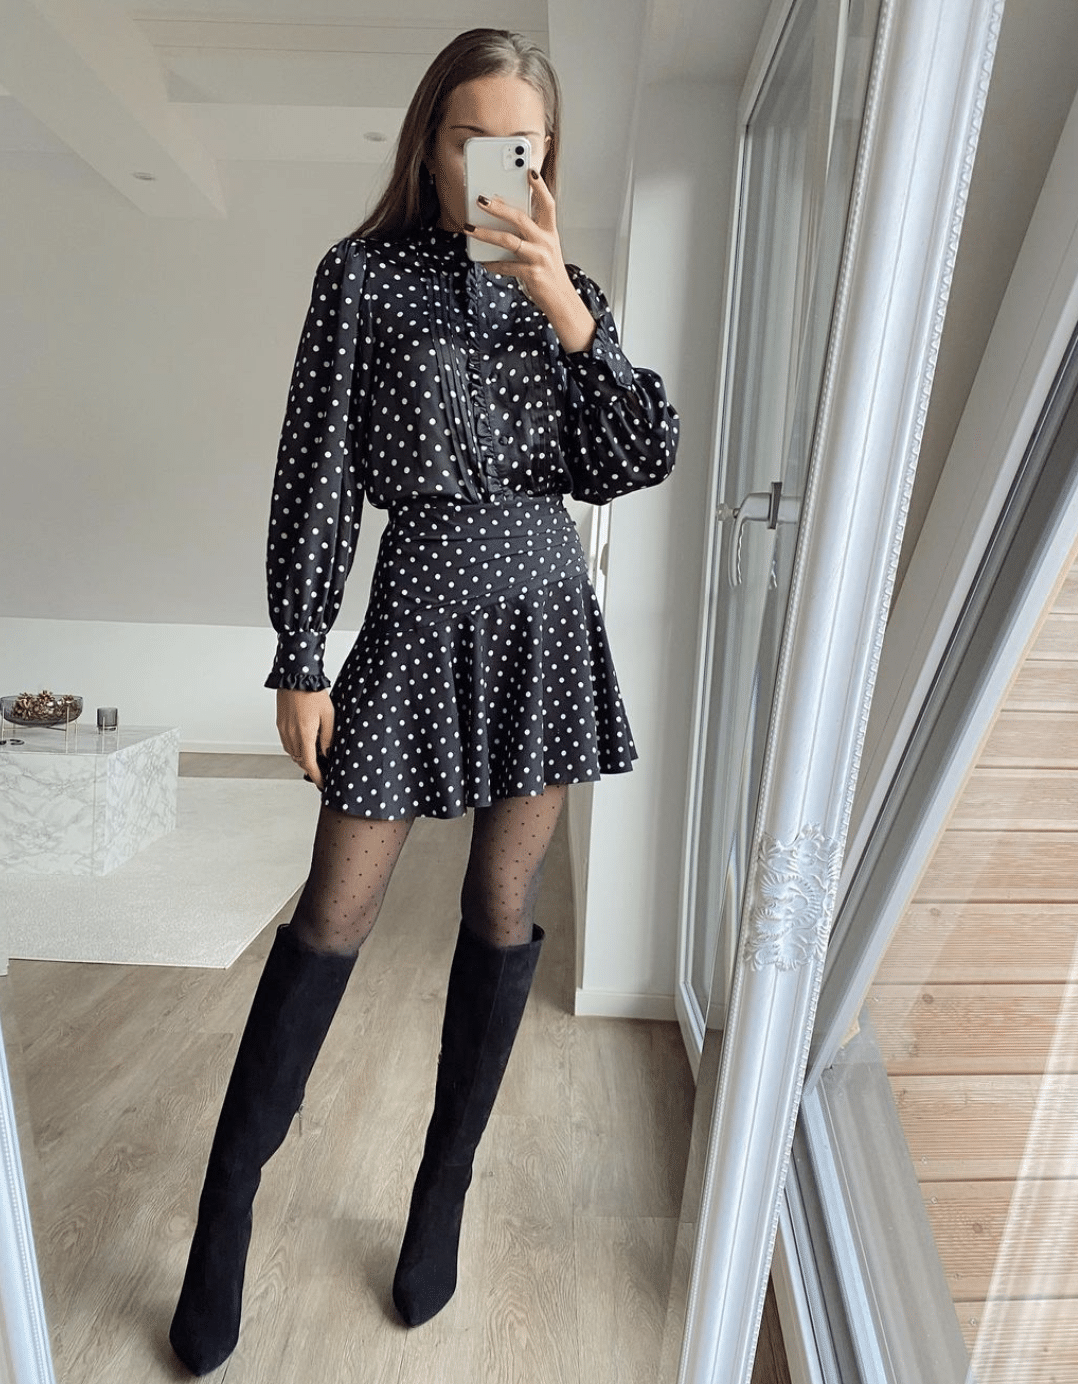 Polka dot dress black and white outfit